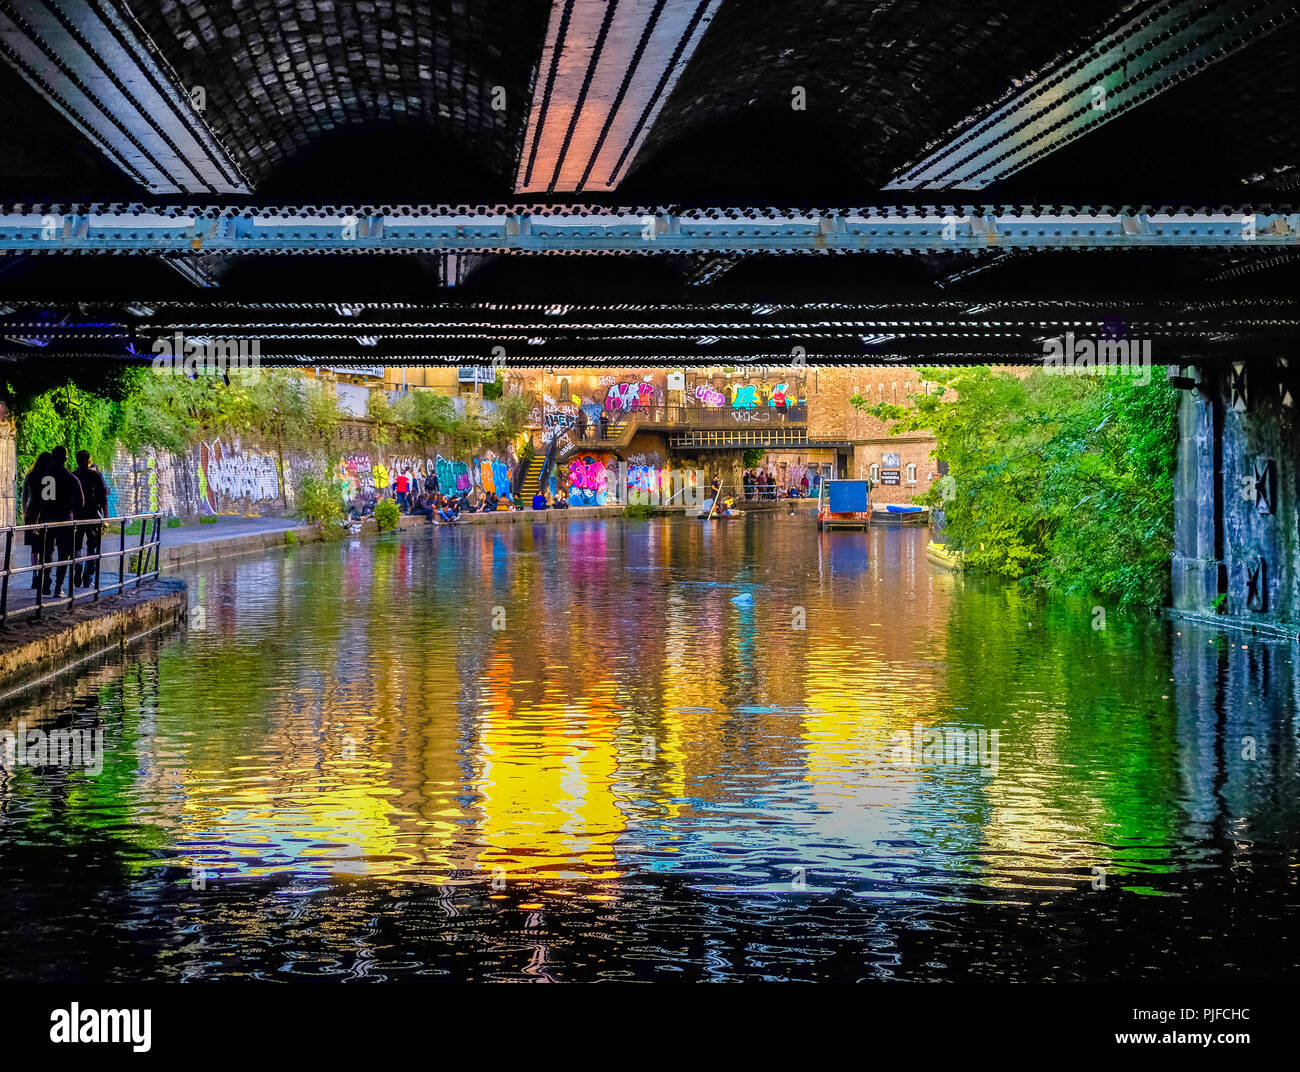 View of Regent's Canal in London, England, from under the bridge at sunset in the summer; Stock Photo